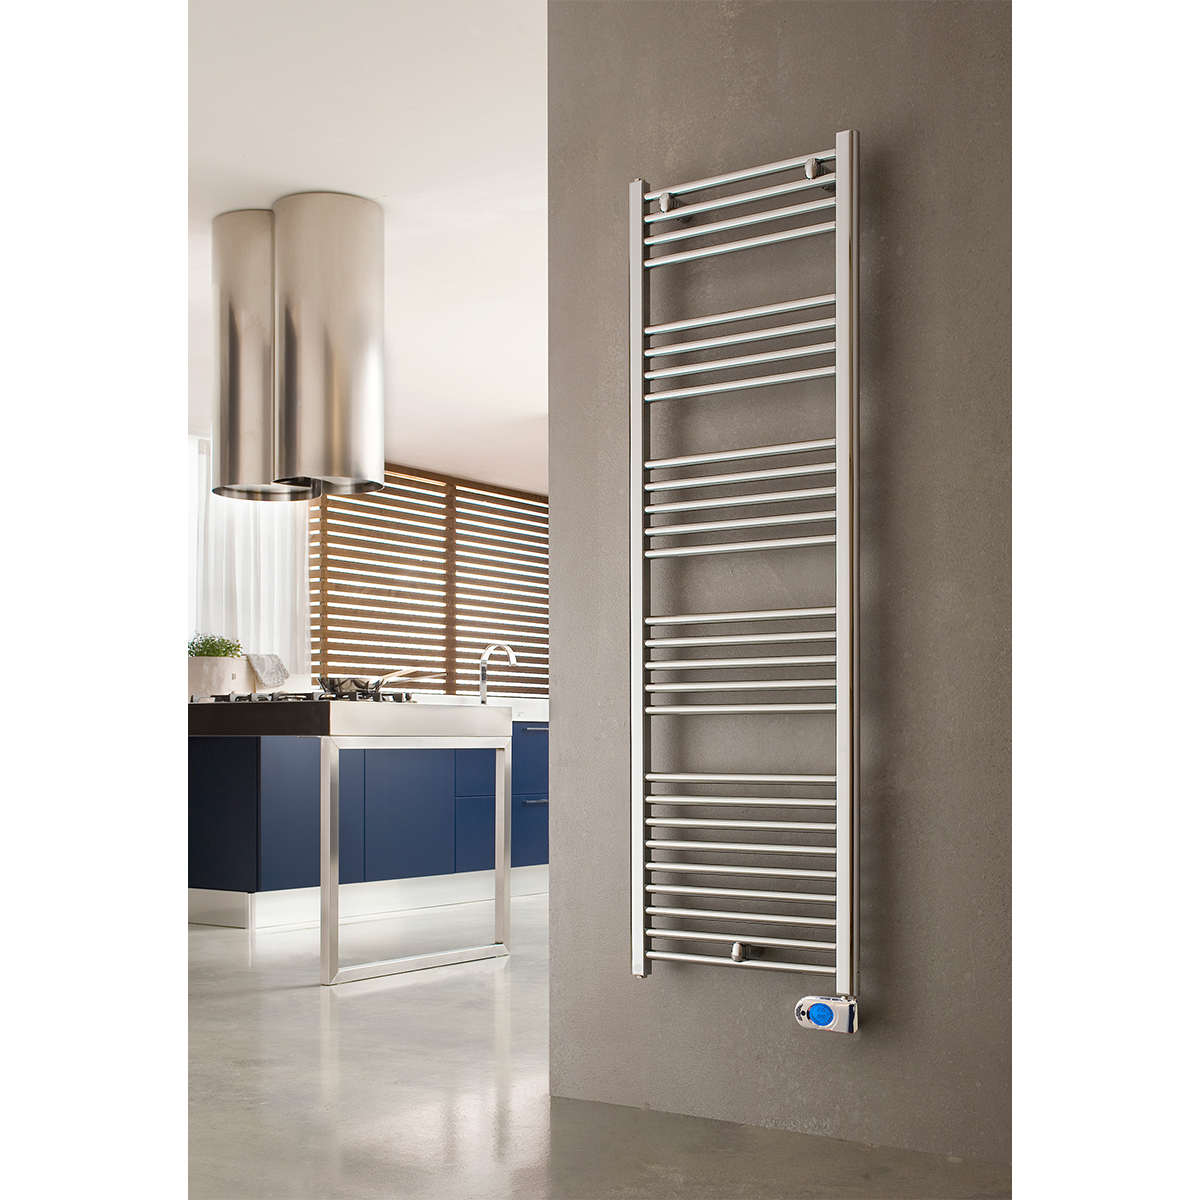 Heated towel rail ALTO 150x50 from MILD STEEL with hydraulic or